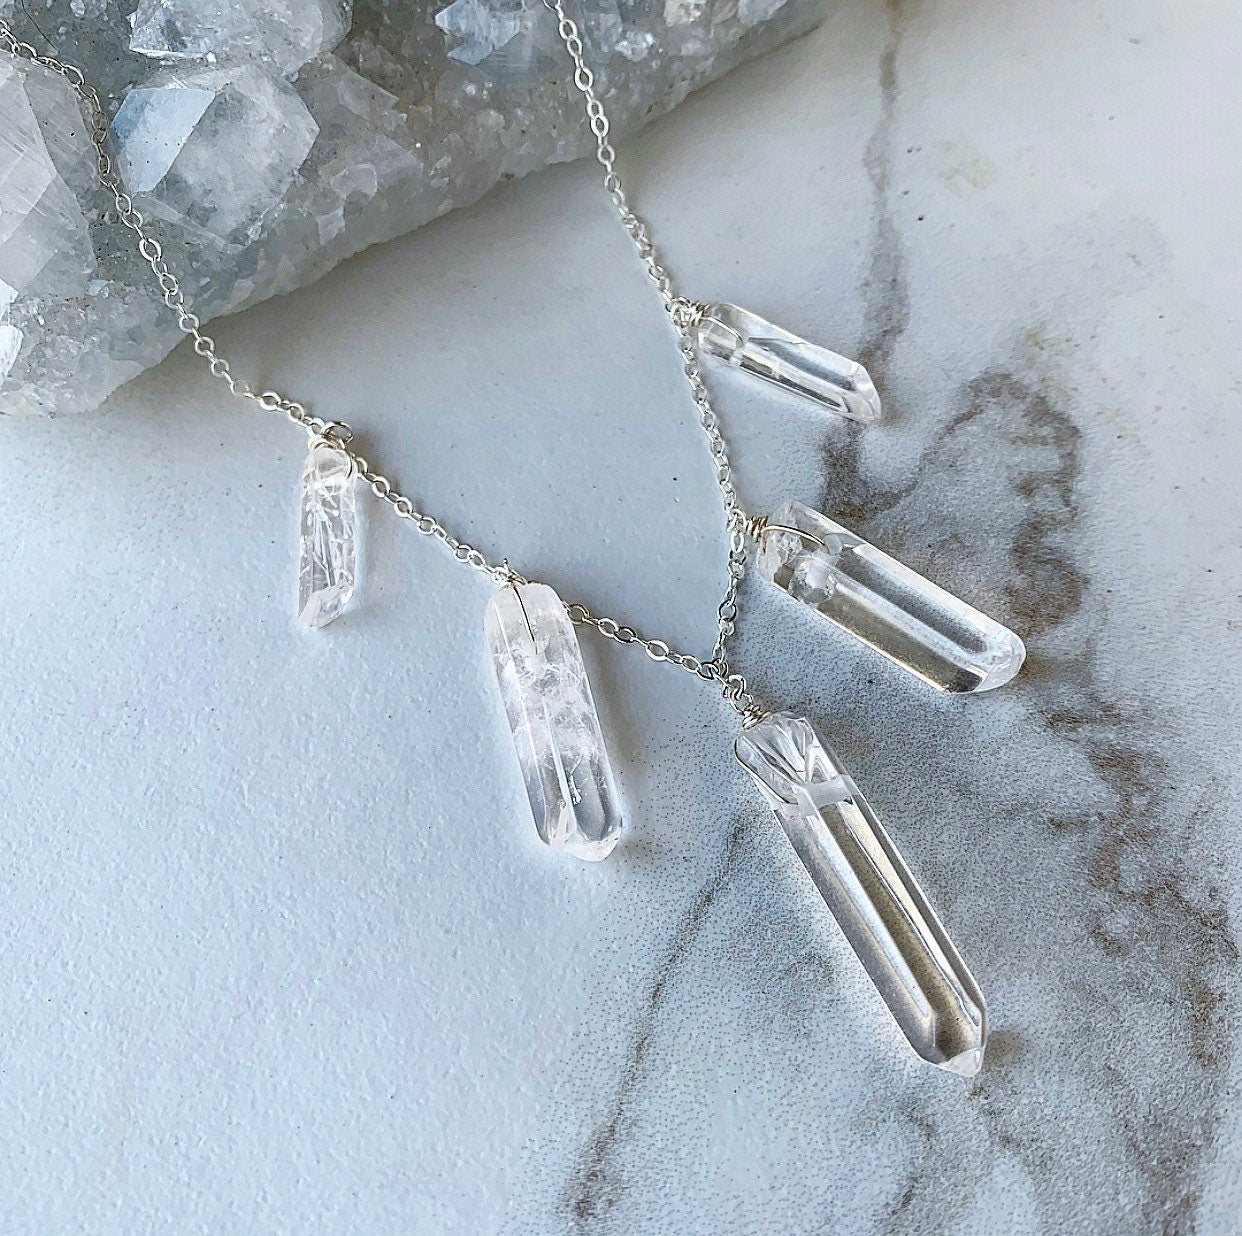 Crystal Quartz Statement Necklace, Multi Stone Raw Quartz Necklace, Raw Crystal Bib Necklace, Chunky Crystal Healing Necklace